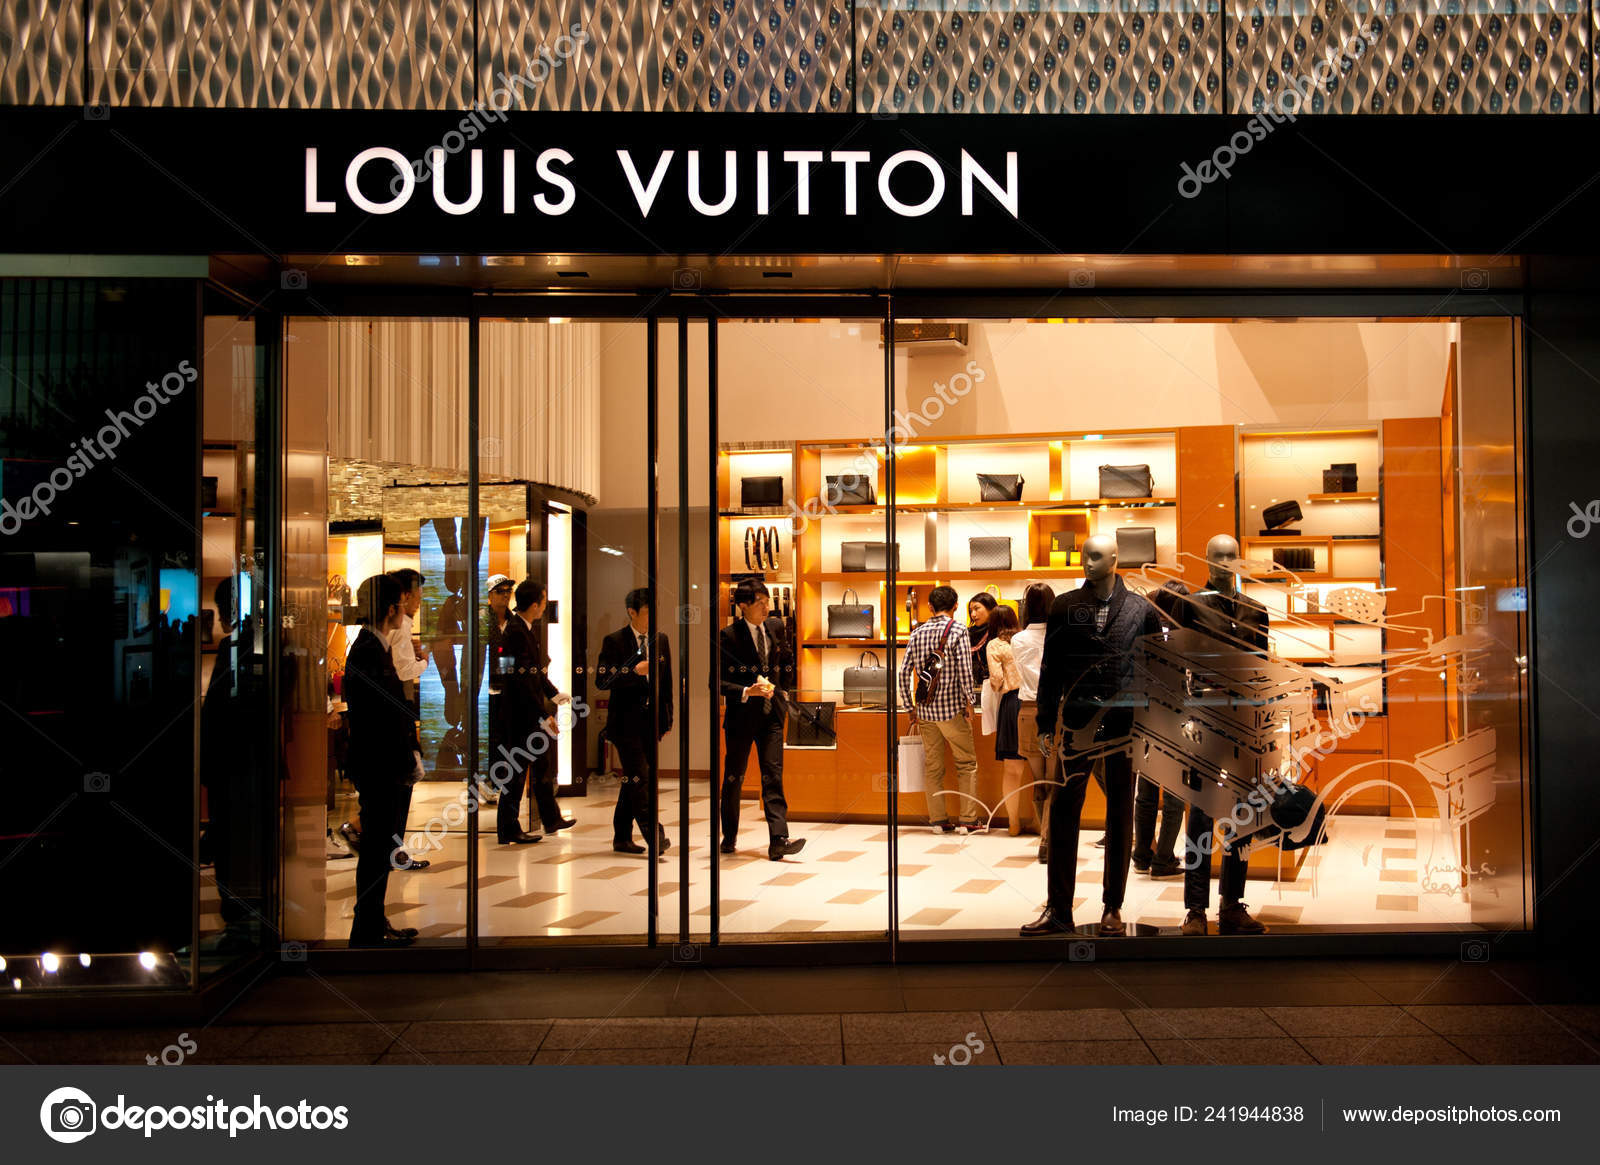 vuitton outlet cheap louis vuitton bags from china